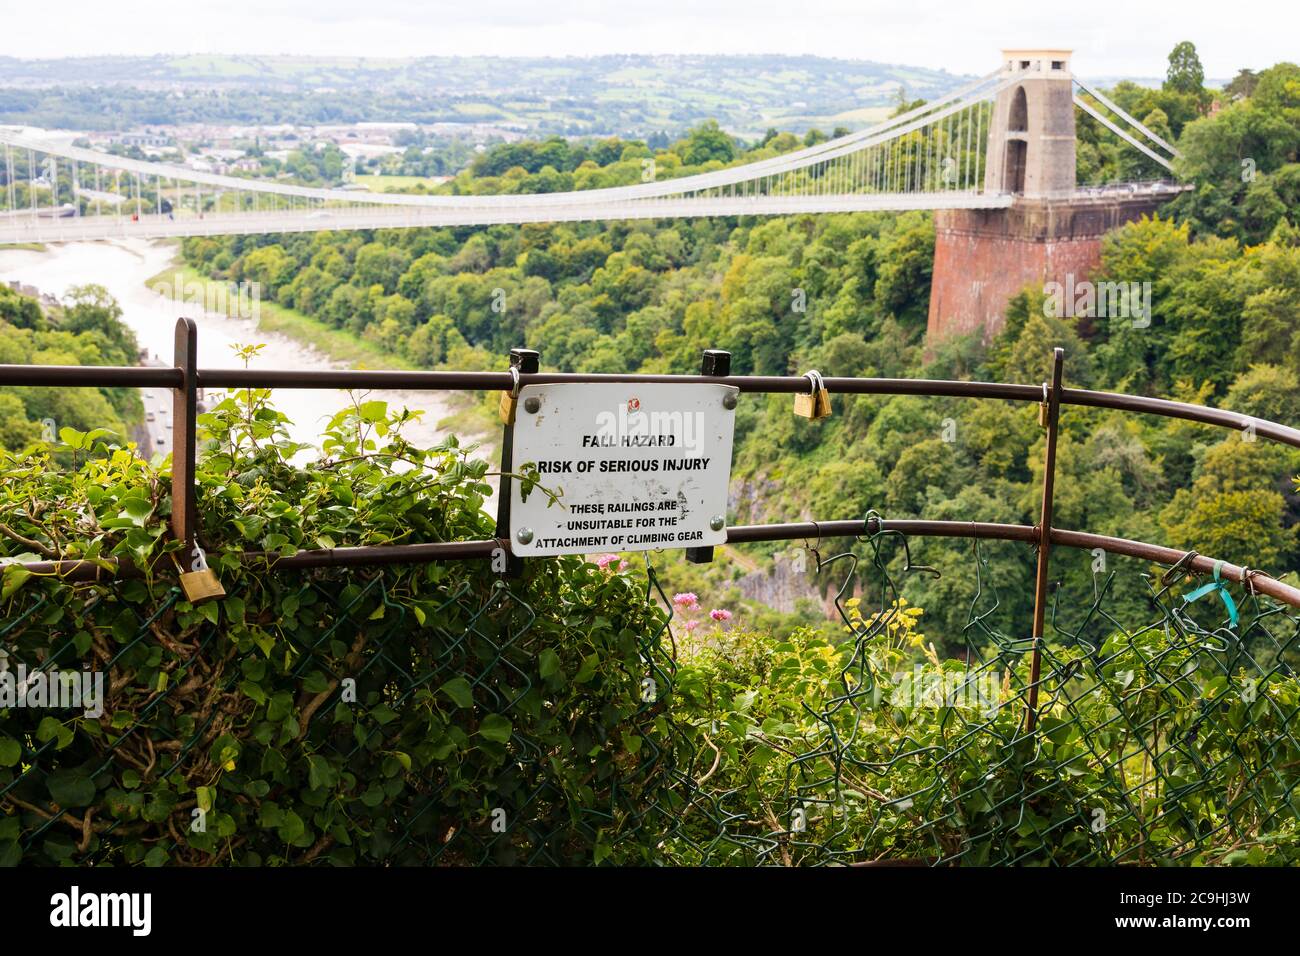 Fall hazard sign at a viewing point, Isambard Kingdom Brunel Clifton Suspension Bridge over the Avon Gorge, between Clifton and Leigh Woods in North S Stock Photo